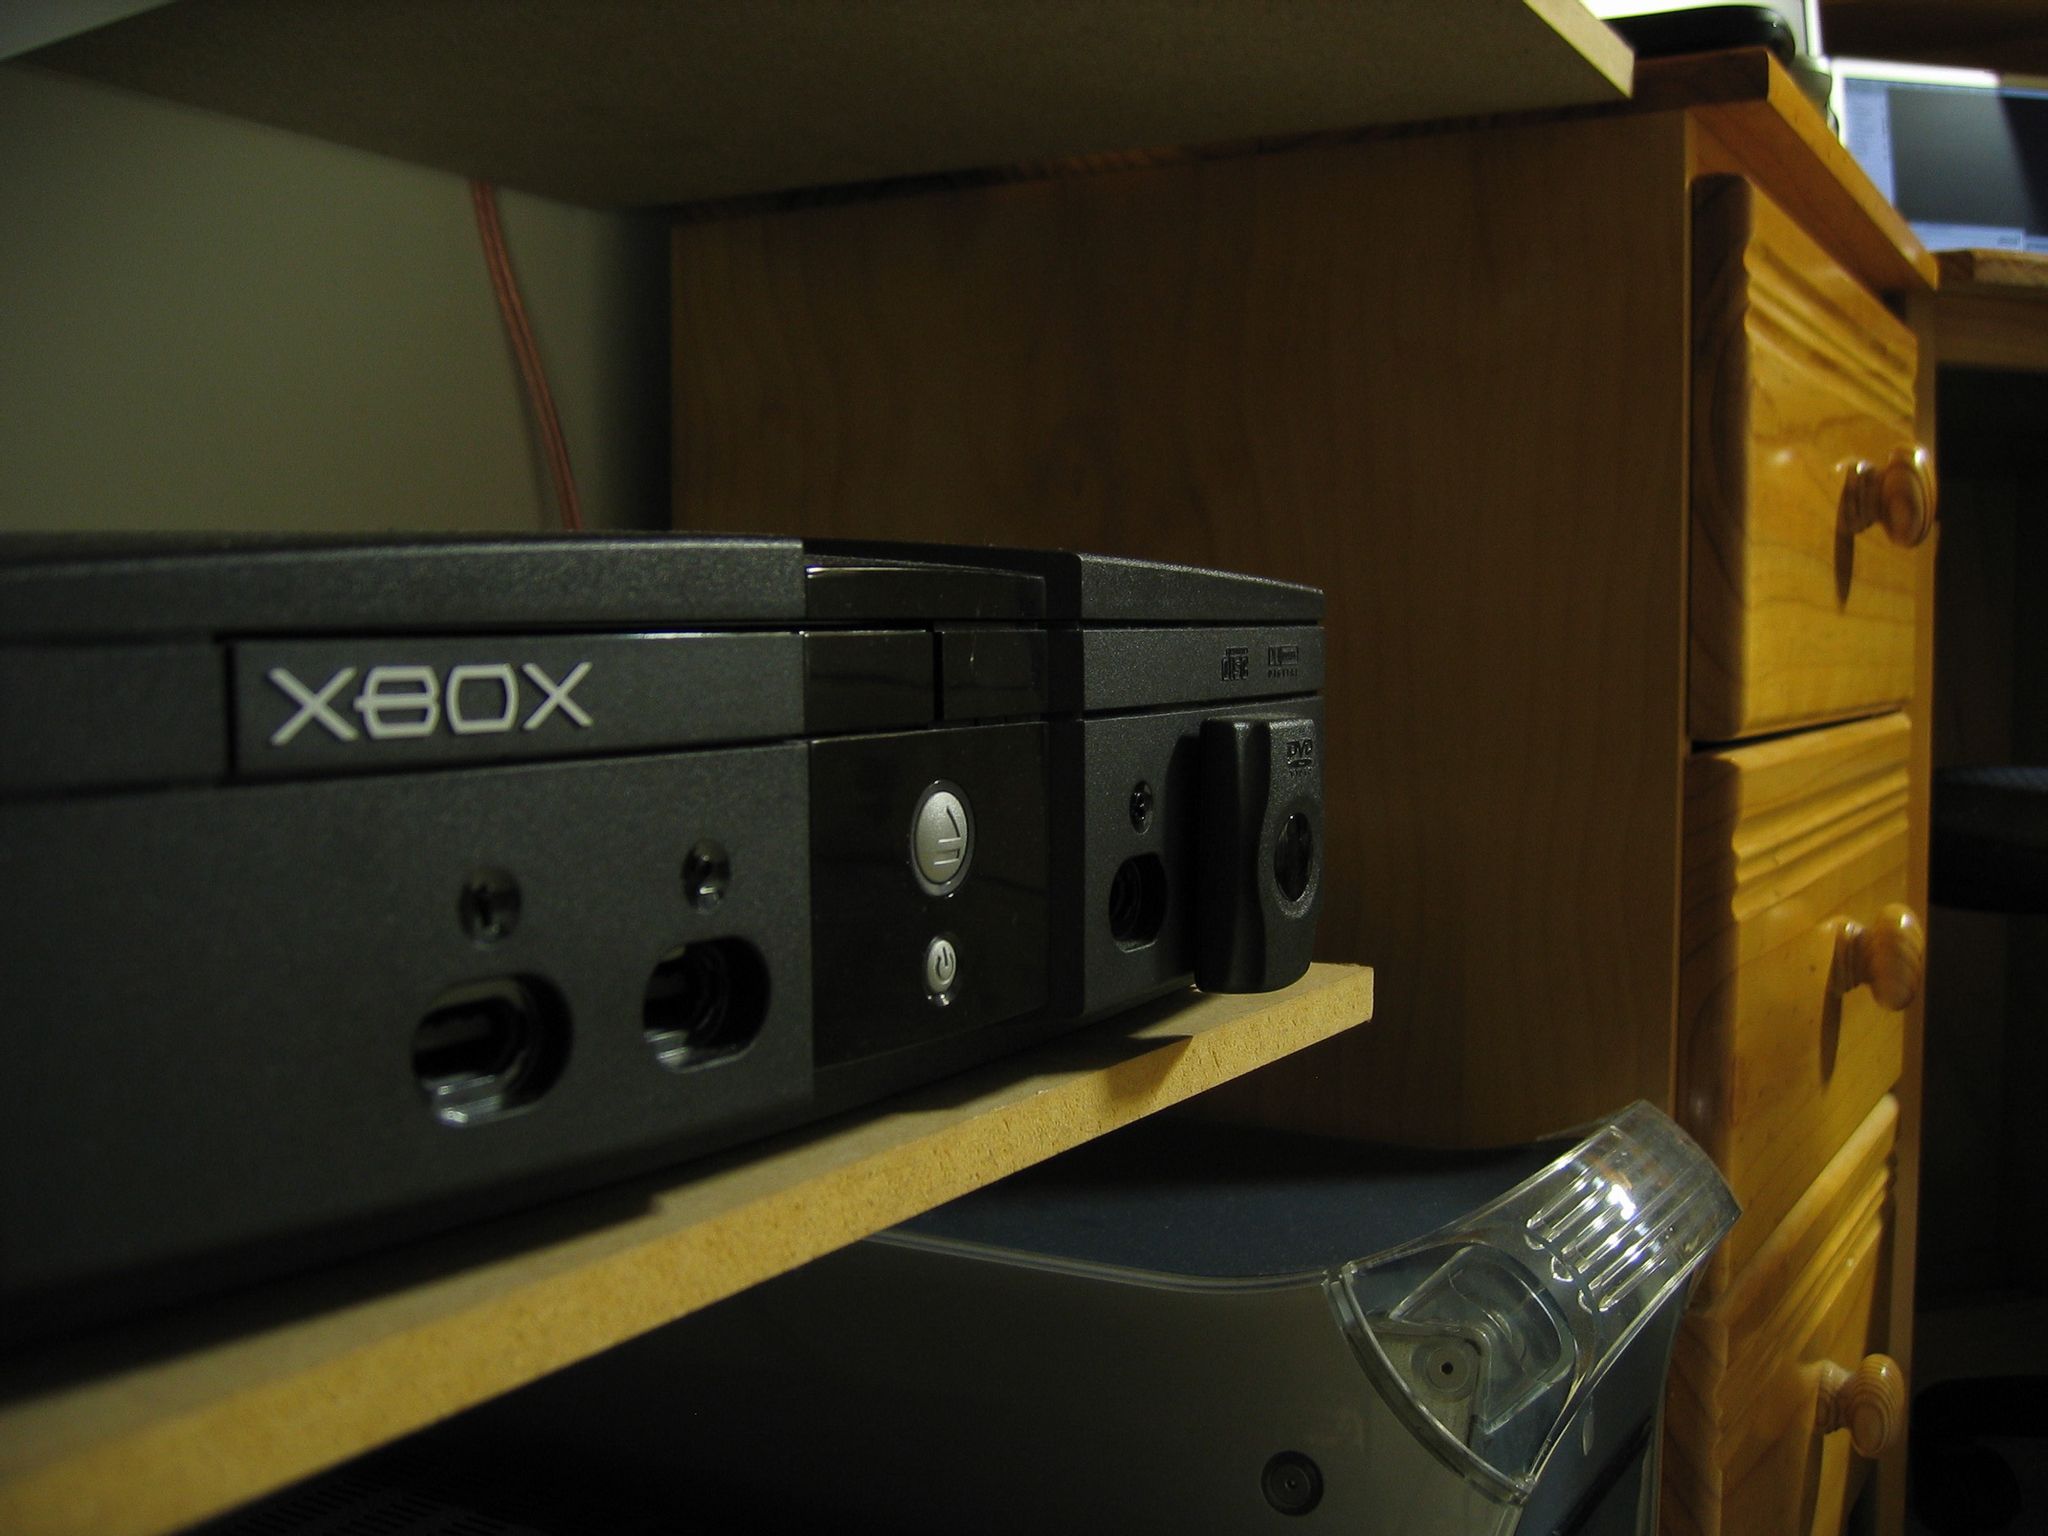 A photo of the front of an original Xbox with the DVD remote receiver attached to one of the controller ports, taken at a sharp angle from the side.